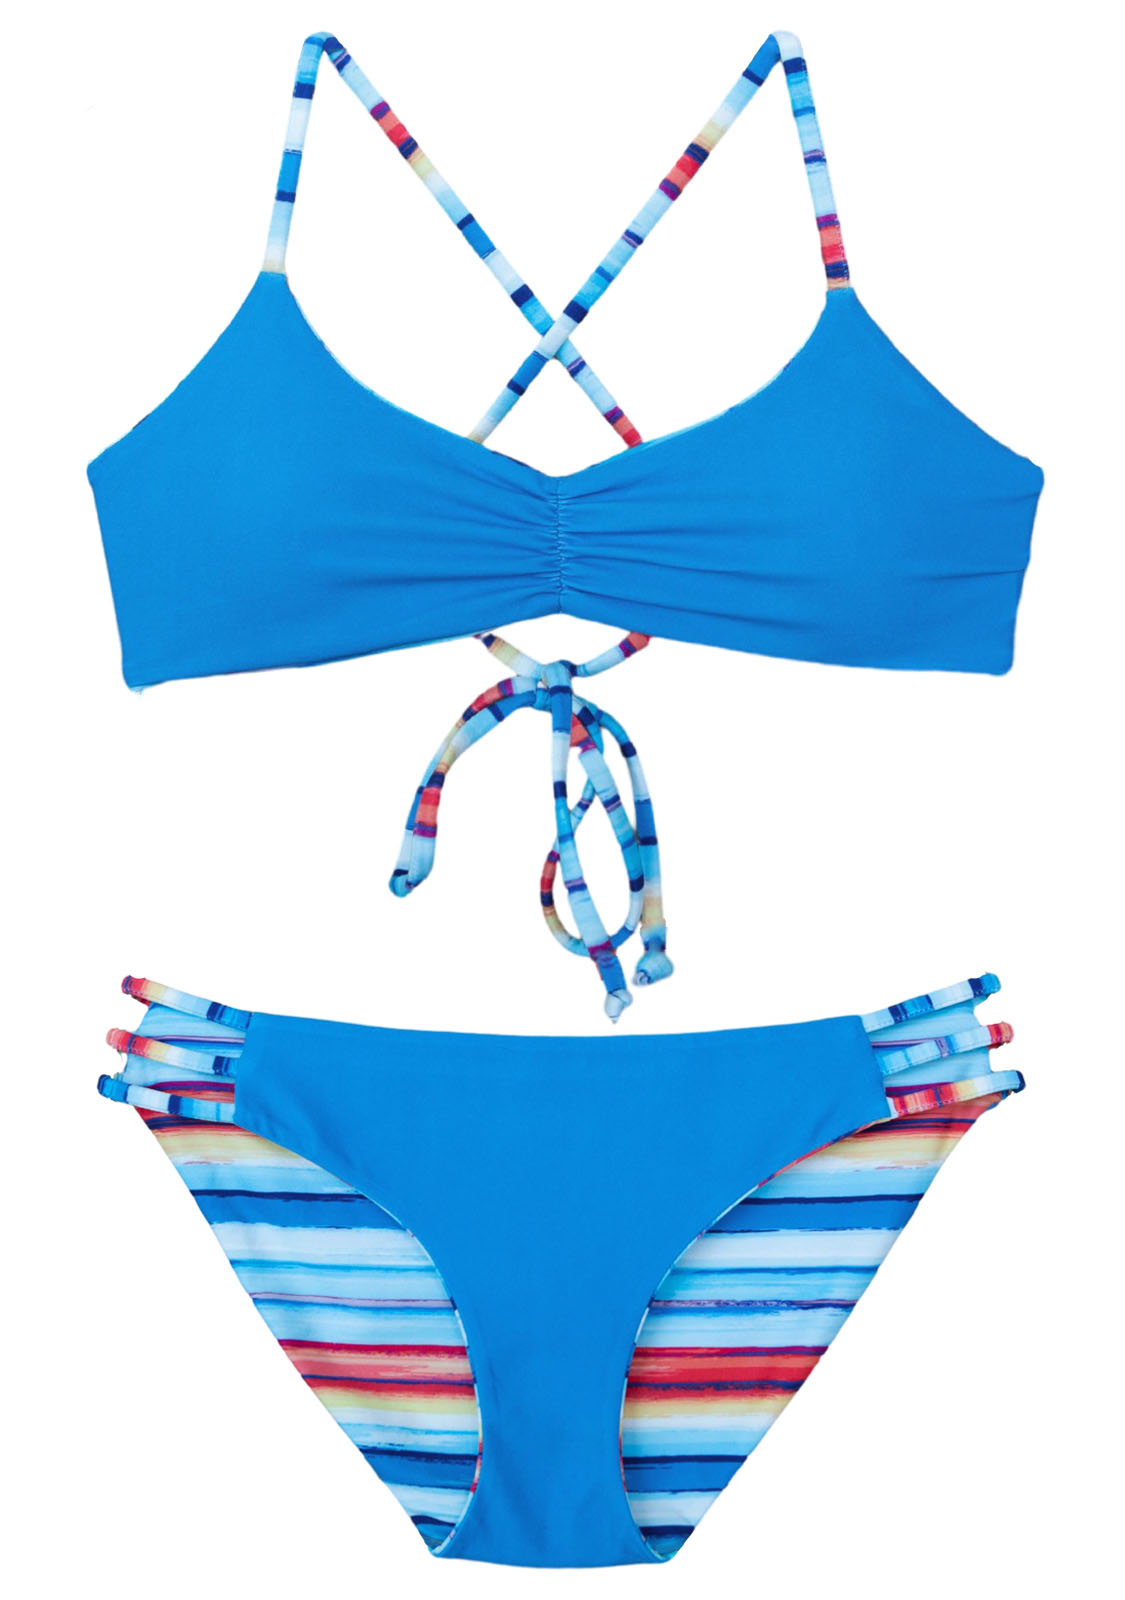 Reversible side of this super cute Chance Loves striped teen bikini